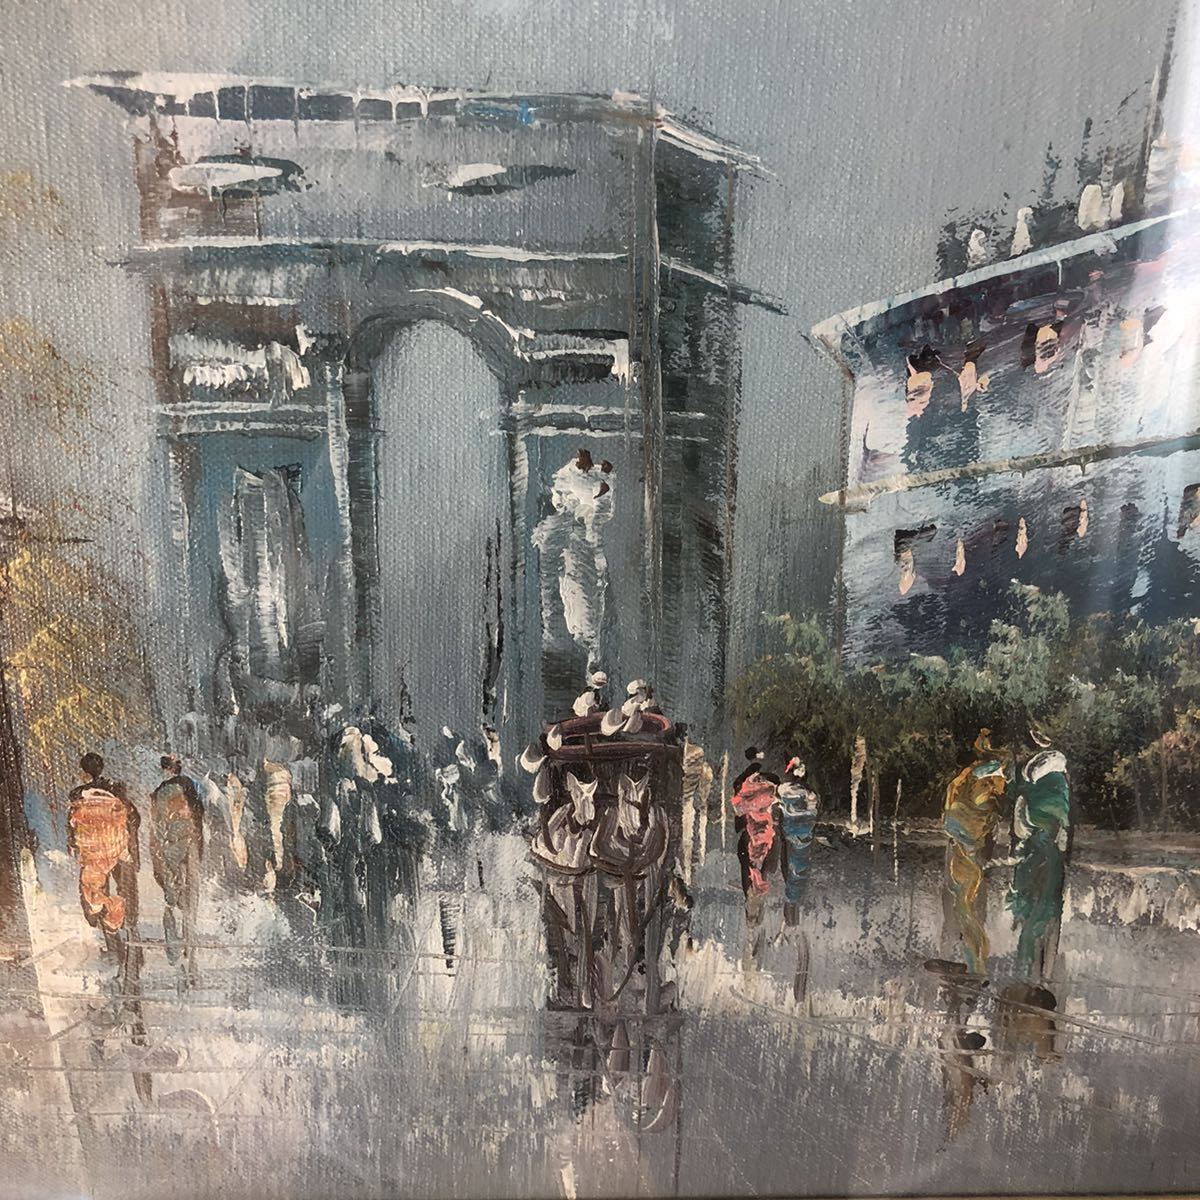  oil painting street. landscape painting Paris. street frame size : approximately width 56cm height 47cm picture frame : wooden work of art picture 